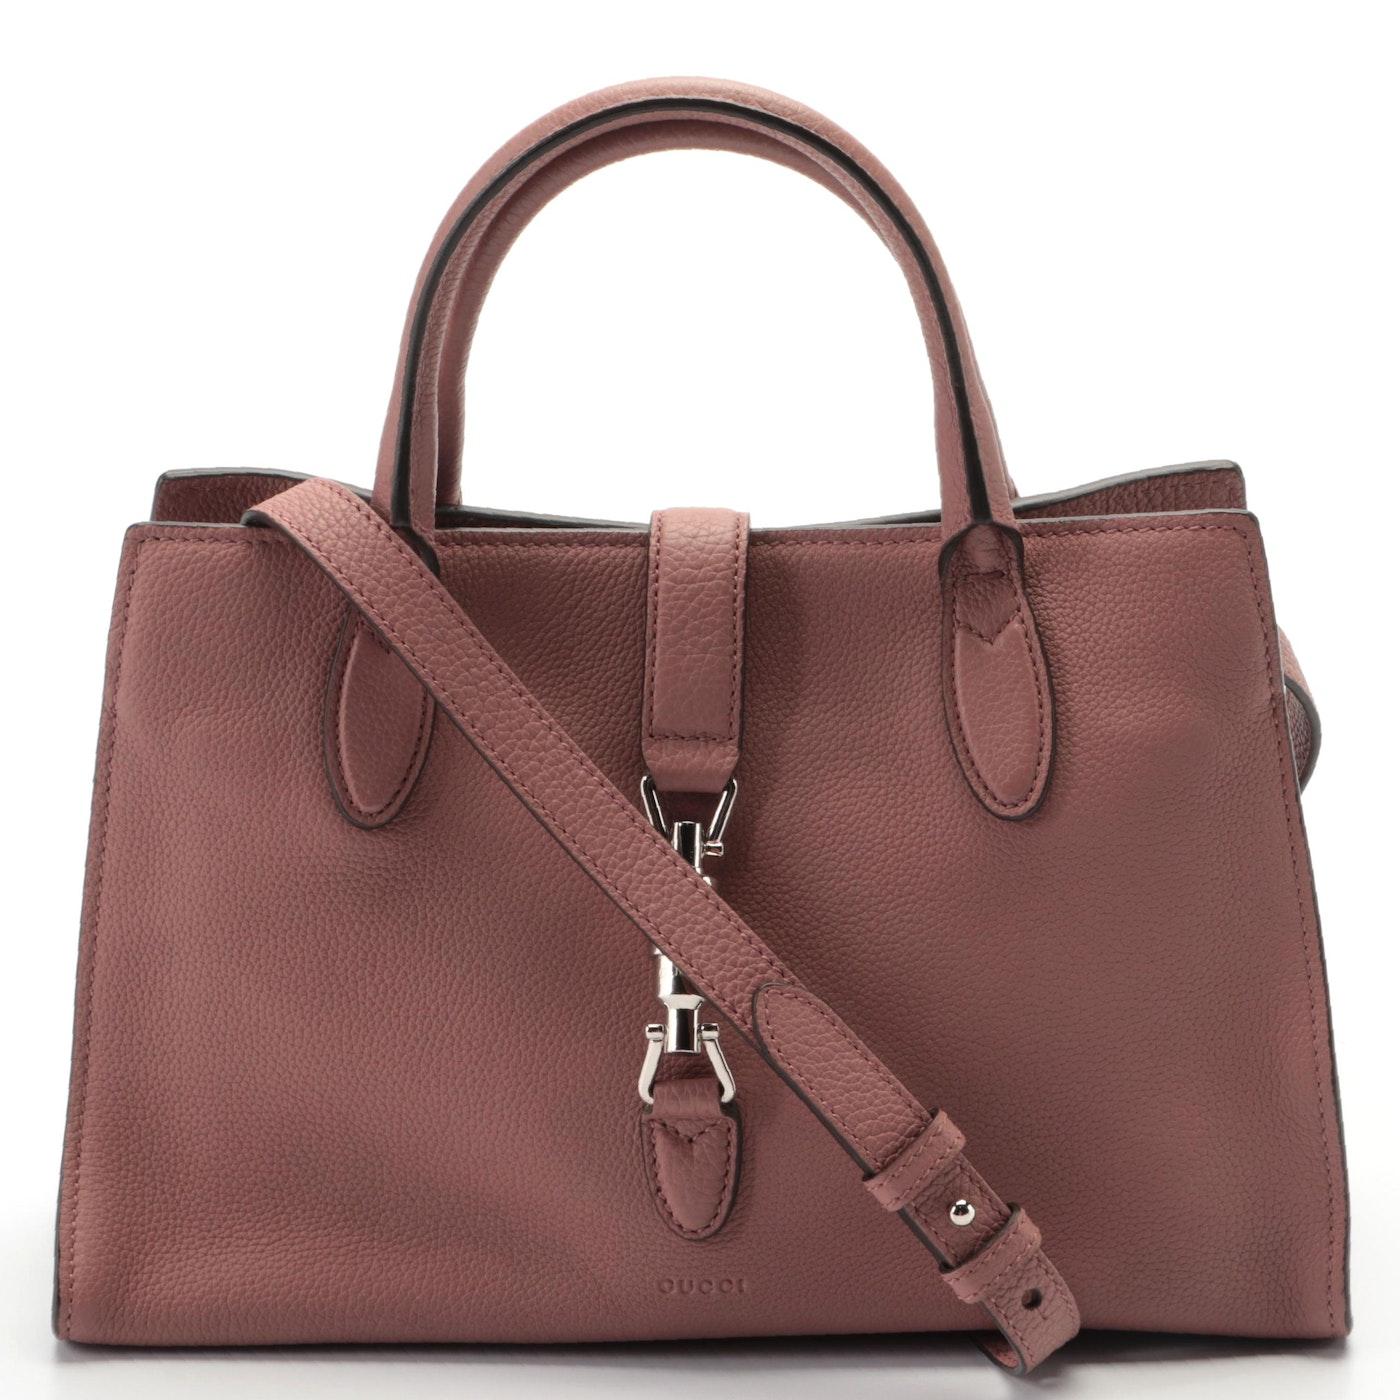 New Gucci Medium Soft Jackie Tote Bag in Full-Grained Leather w/ Piston Closure For Sale 1